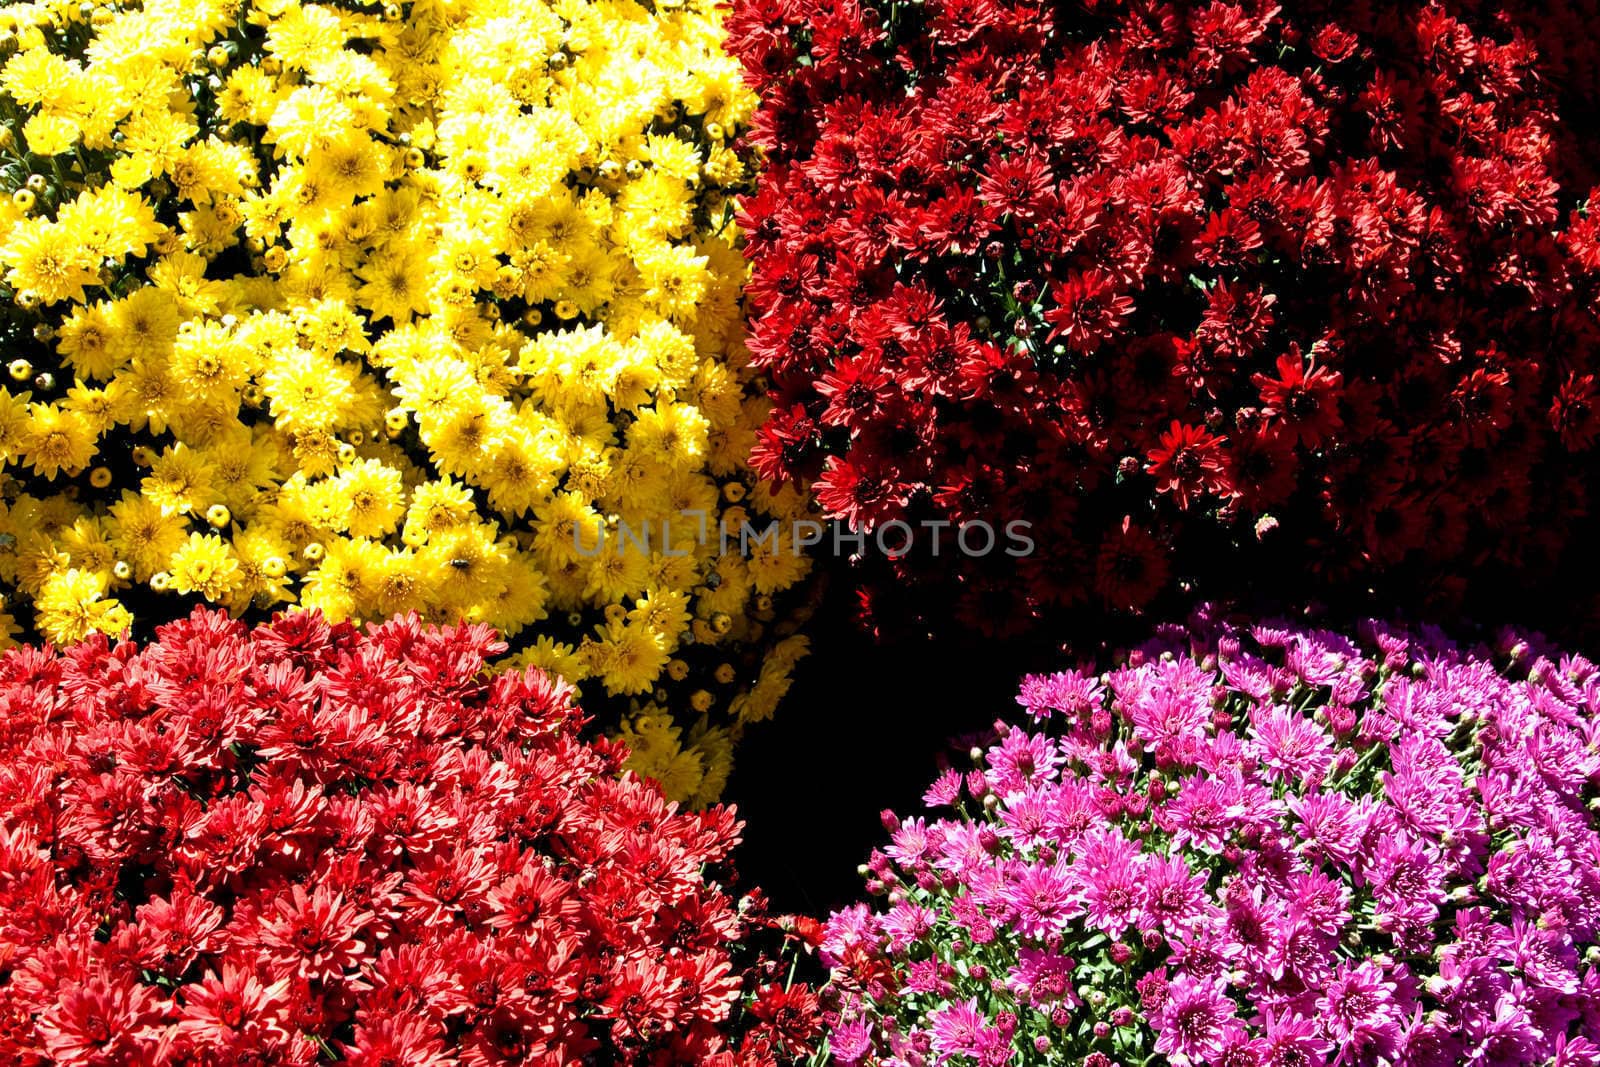 Four colors of fall mums in pots